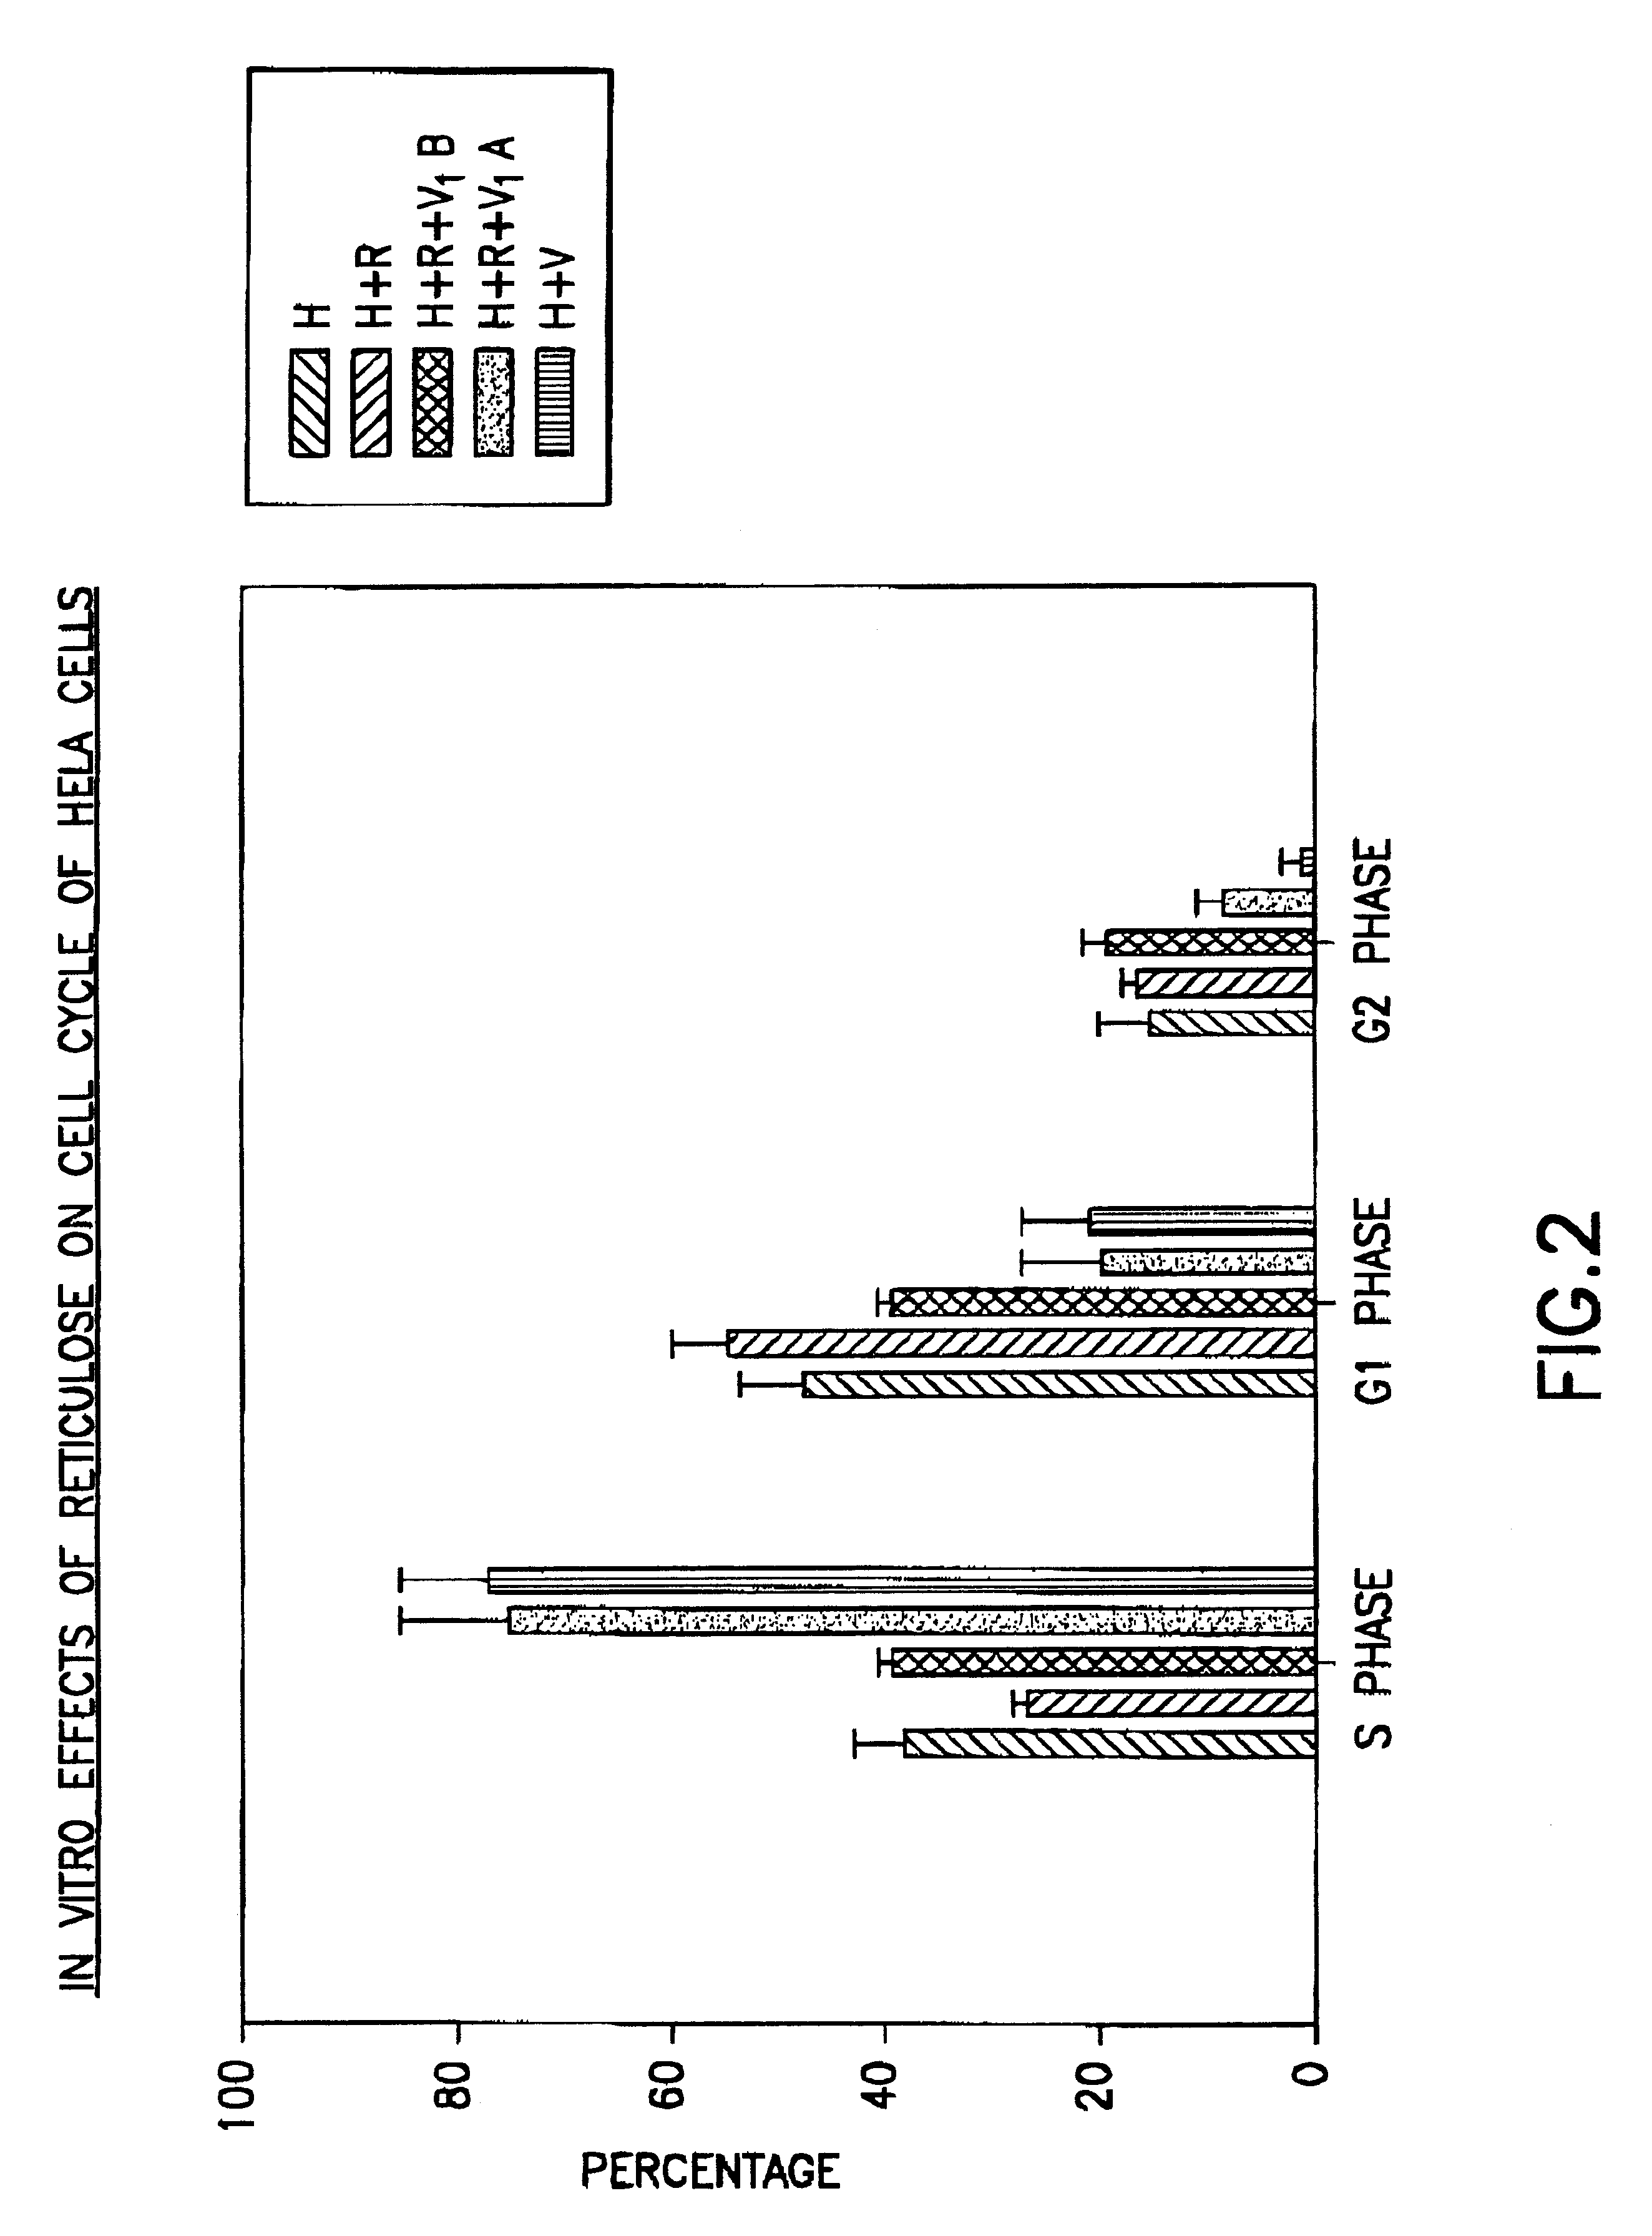 Assay method for determining Product R's effect on adenovirus infection of Hela cells